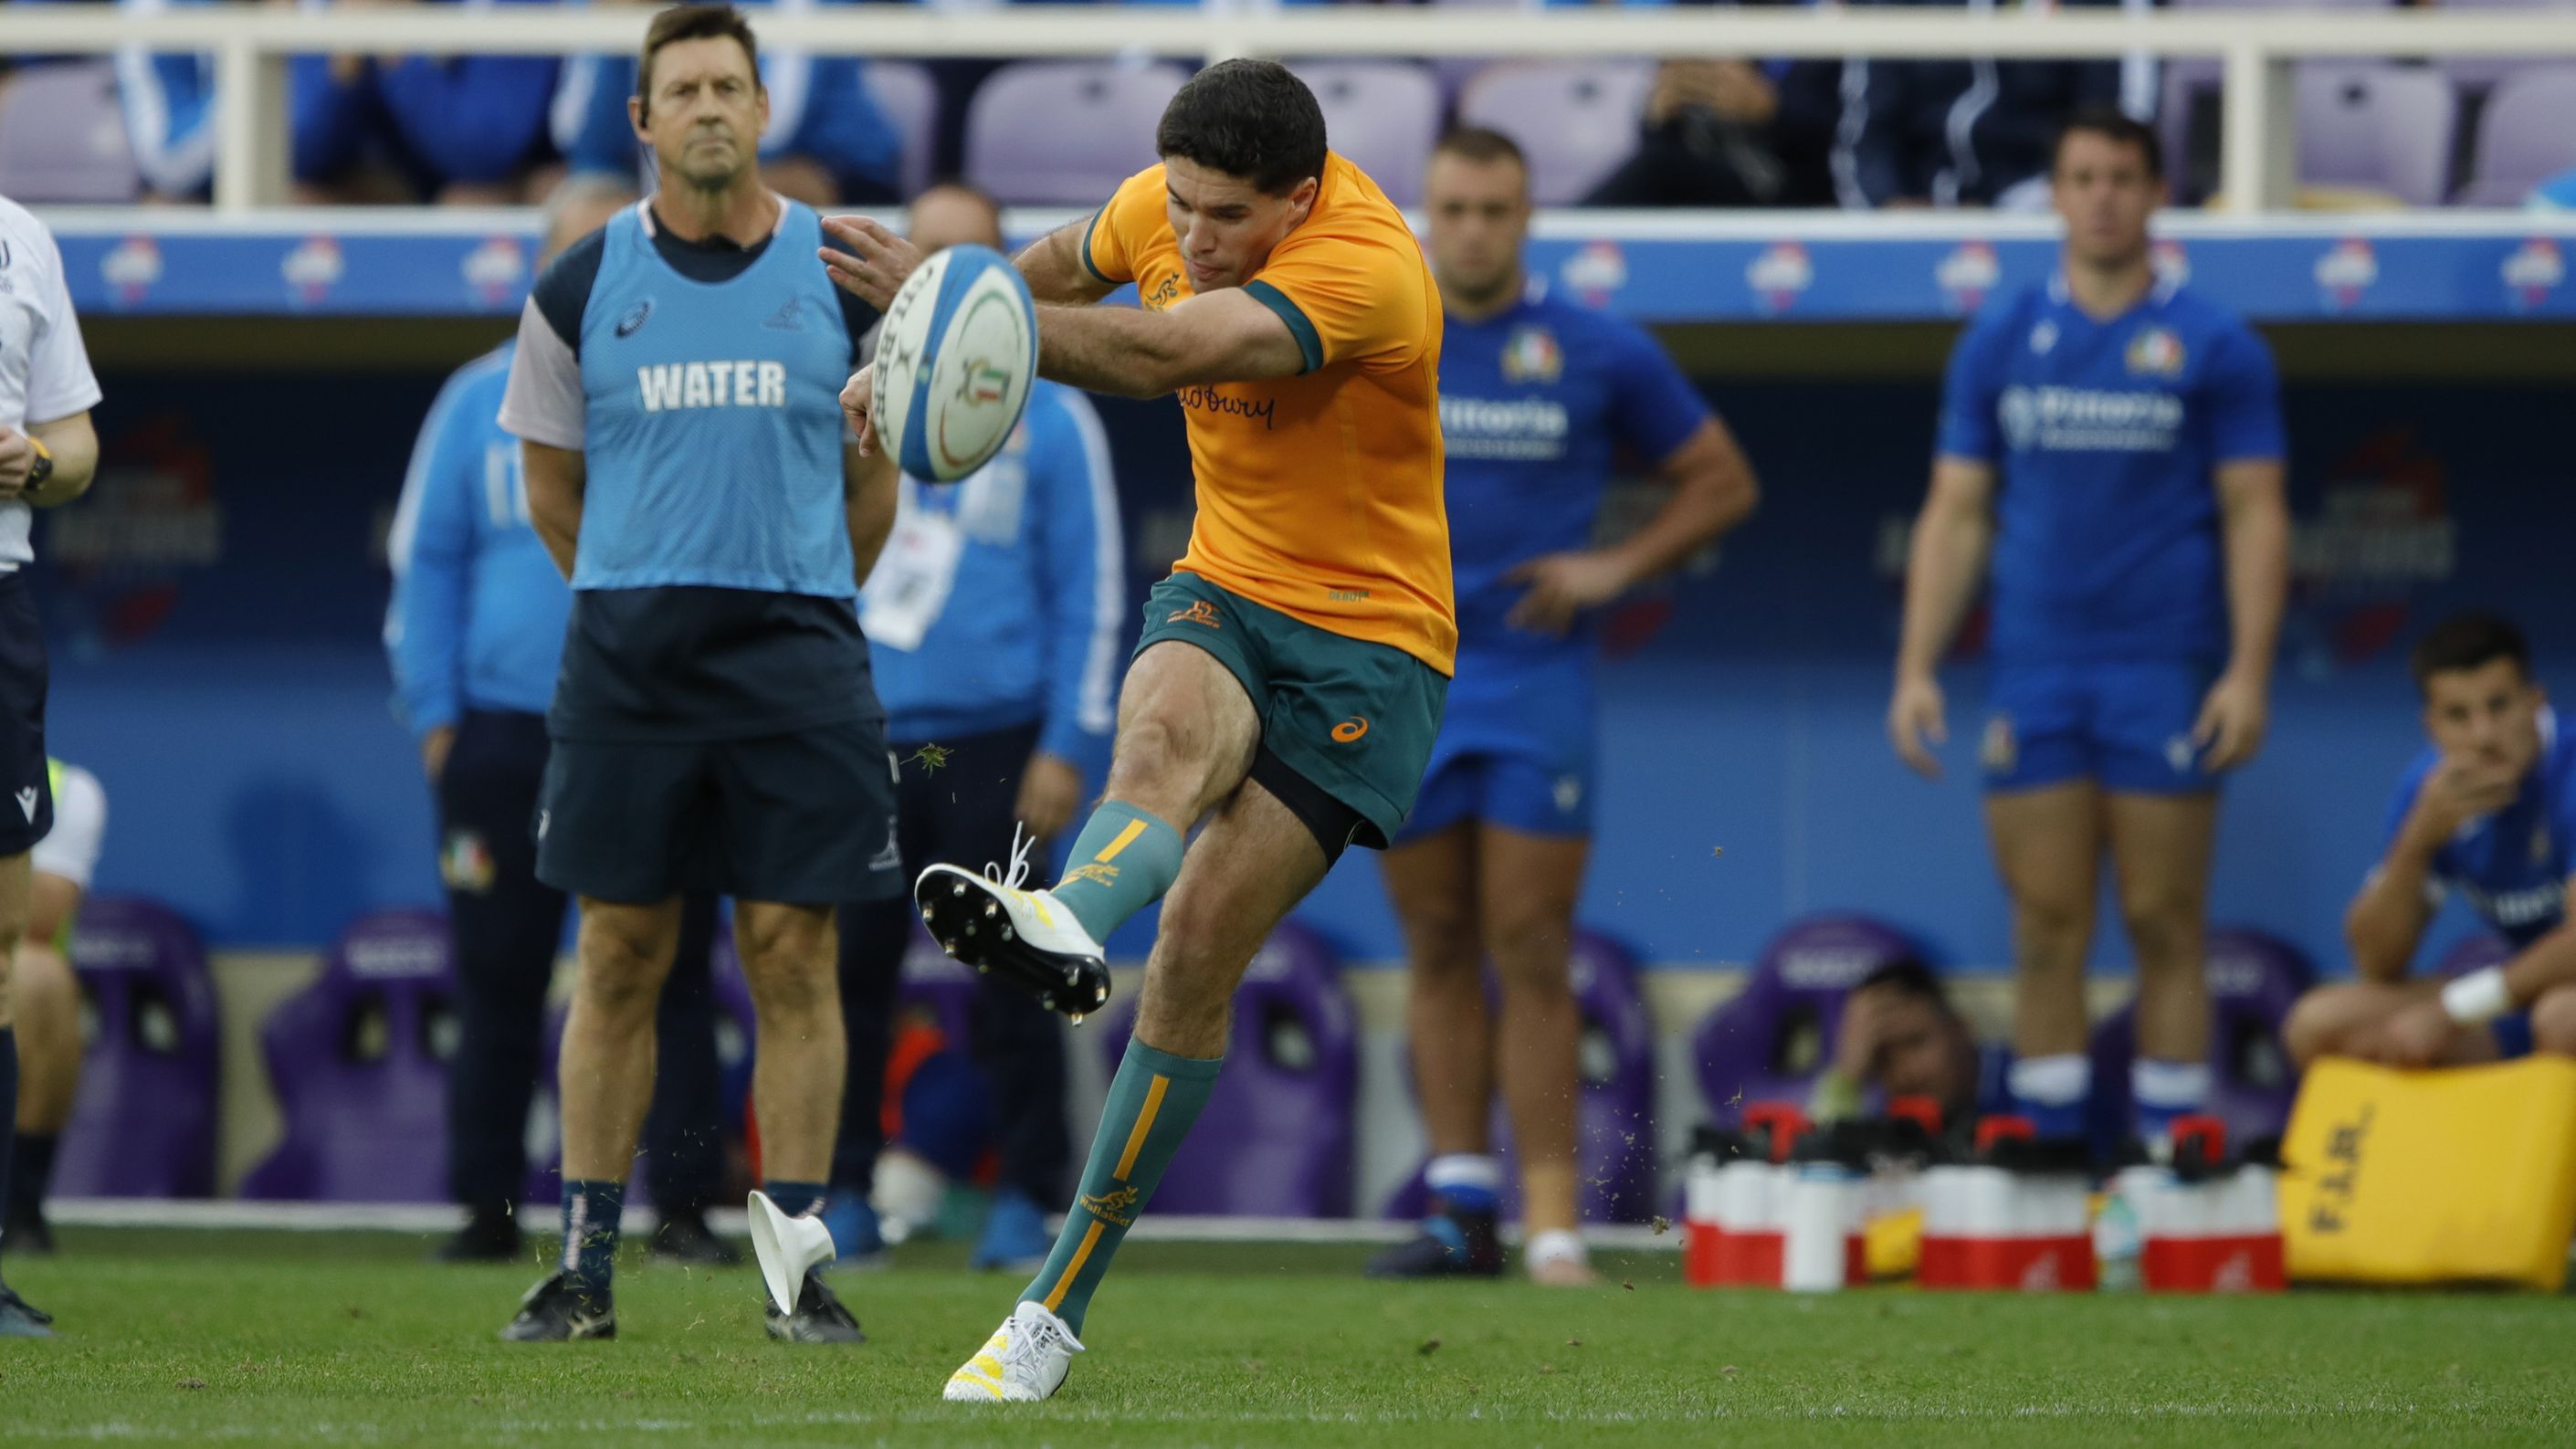 Ben Donaldson kicks a conversion for the Wallabies against Italy.